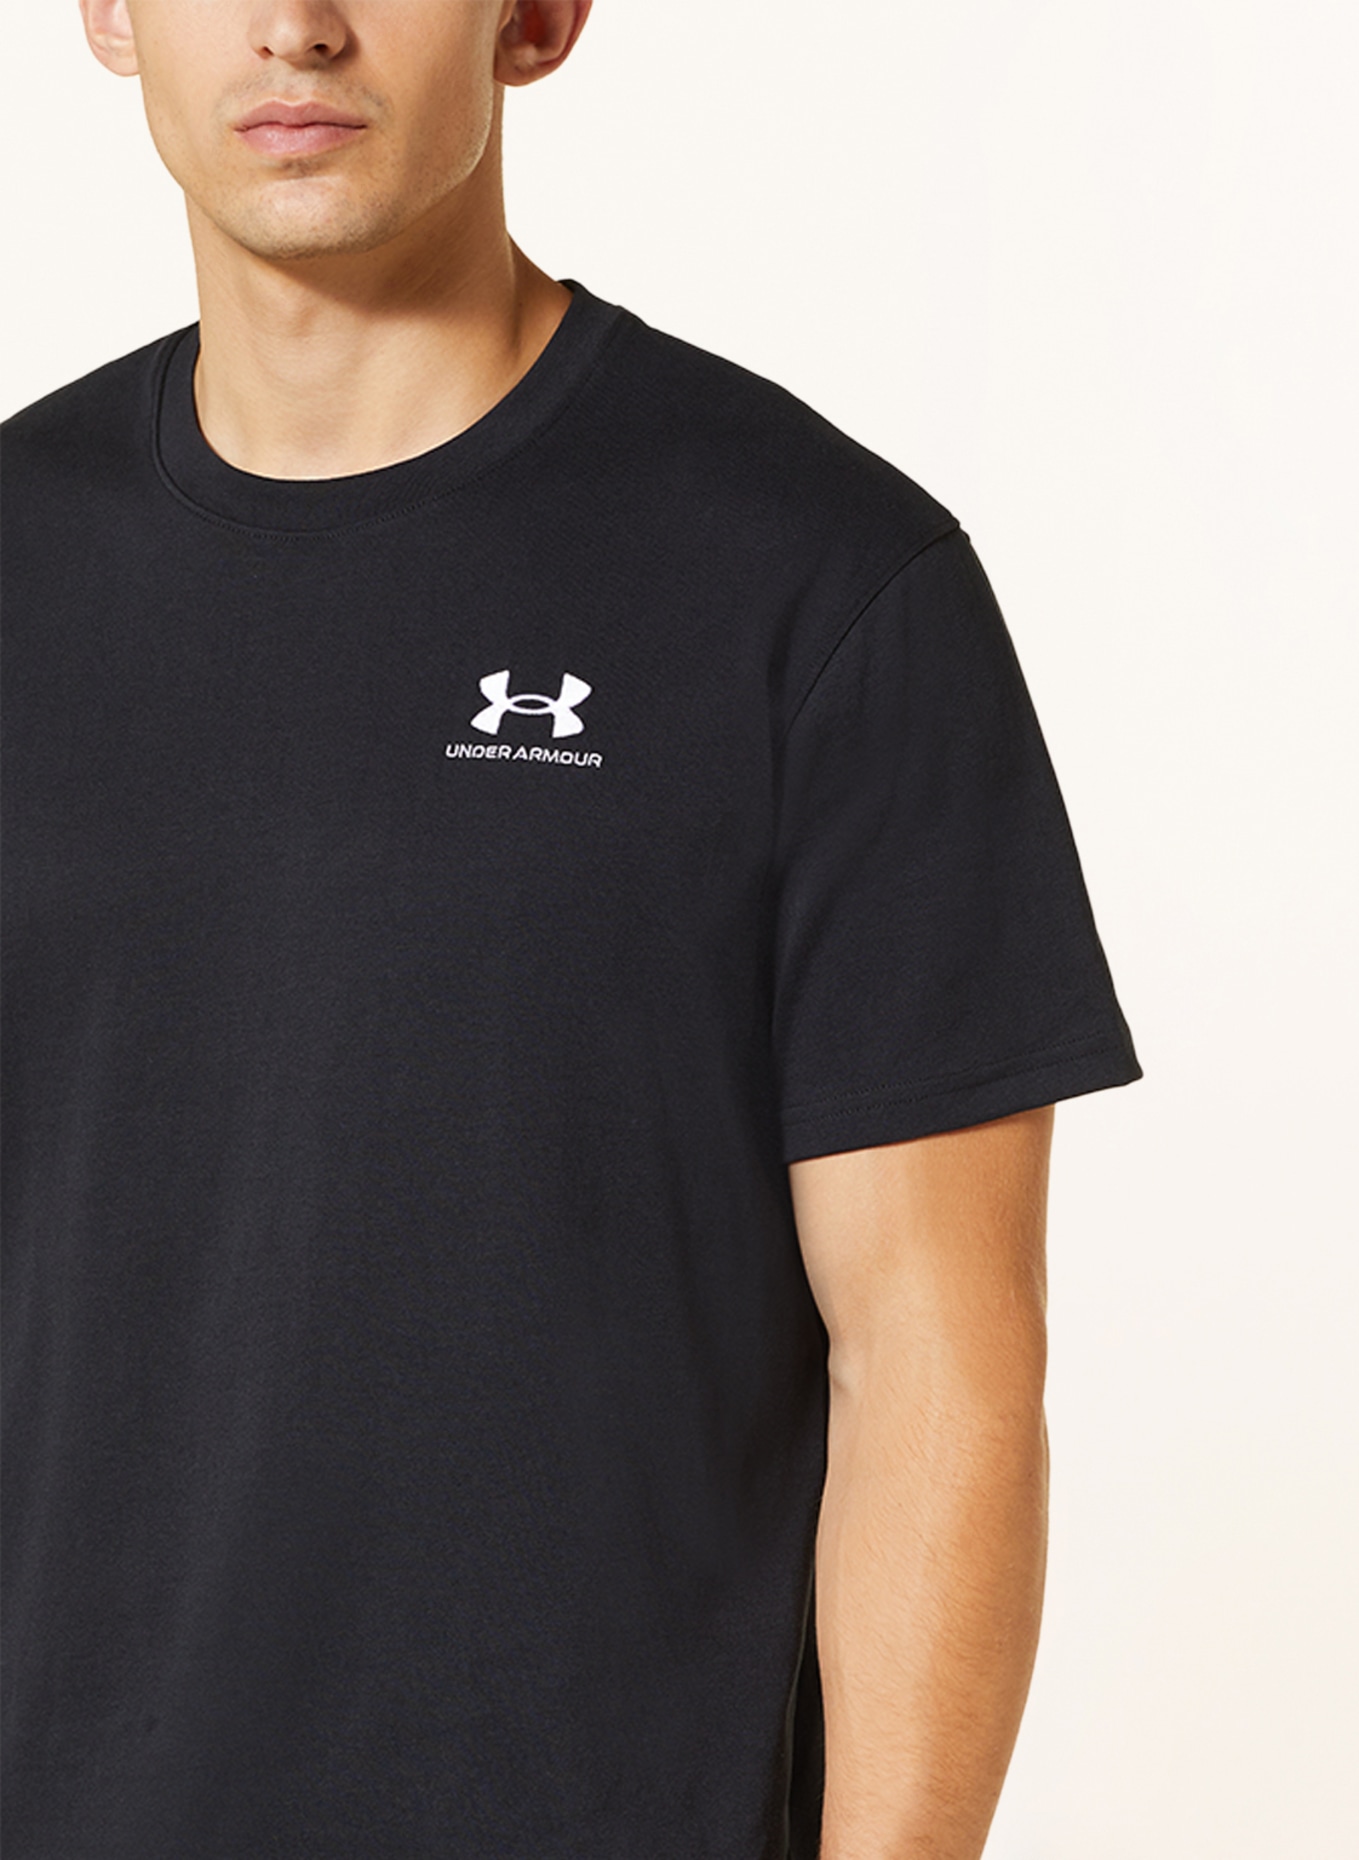 UNDER ARMOUR T-shirt HEAVYWEIGHT, Color: BLACK (Image 4)